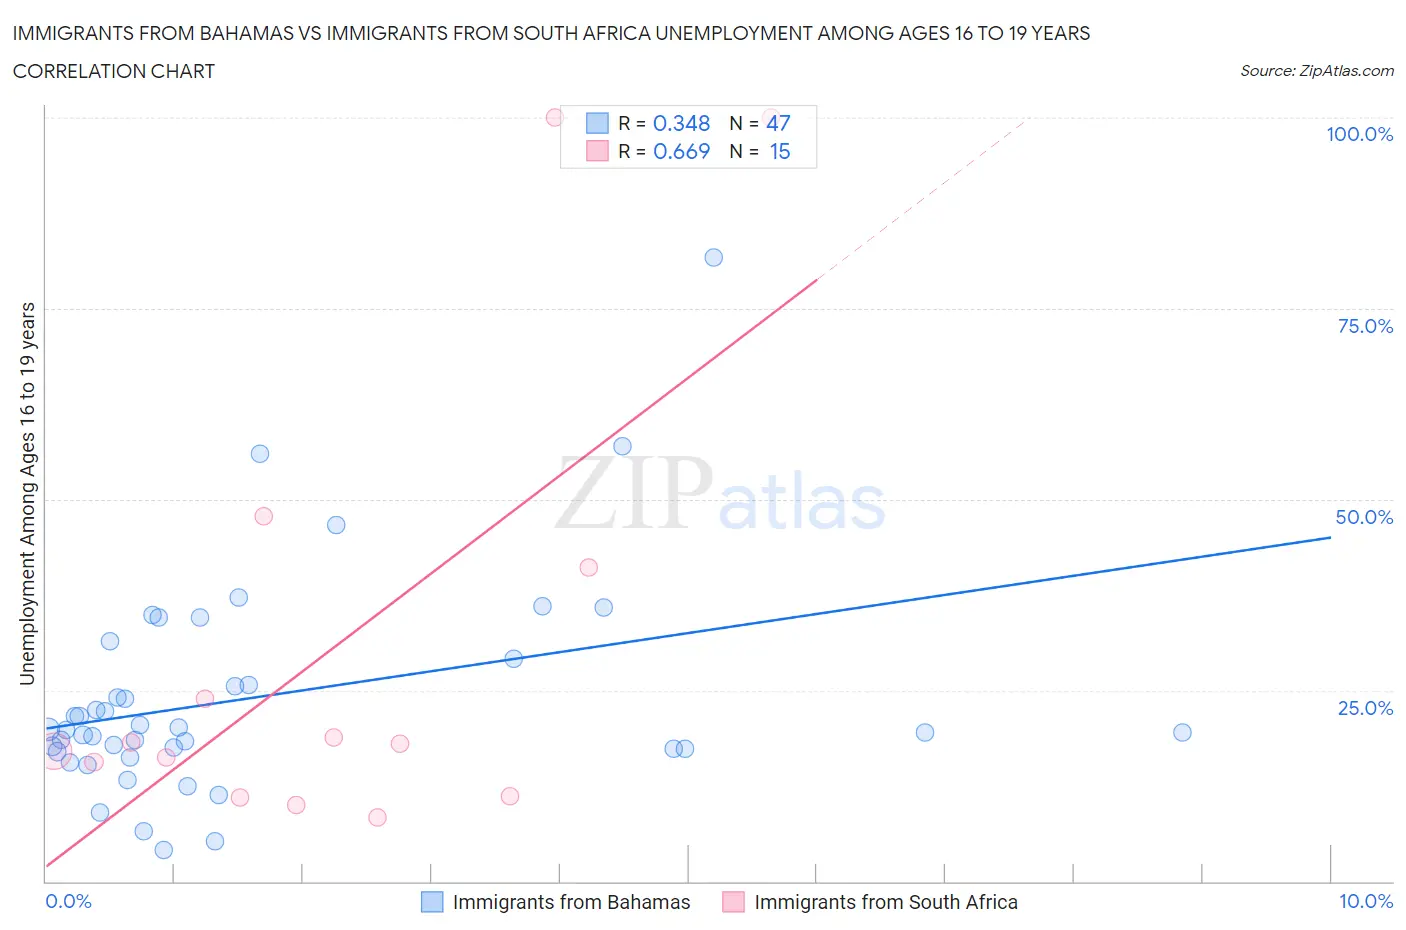 Immigrants from Bahamas vs Immigrants from South Africa Unemployment Among Ages 16 to 19 years